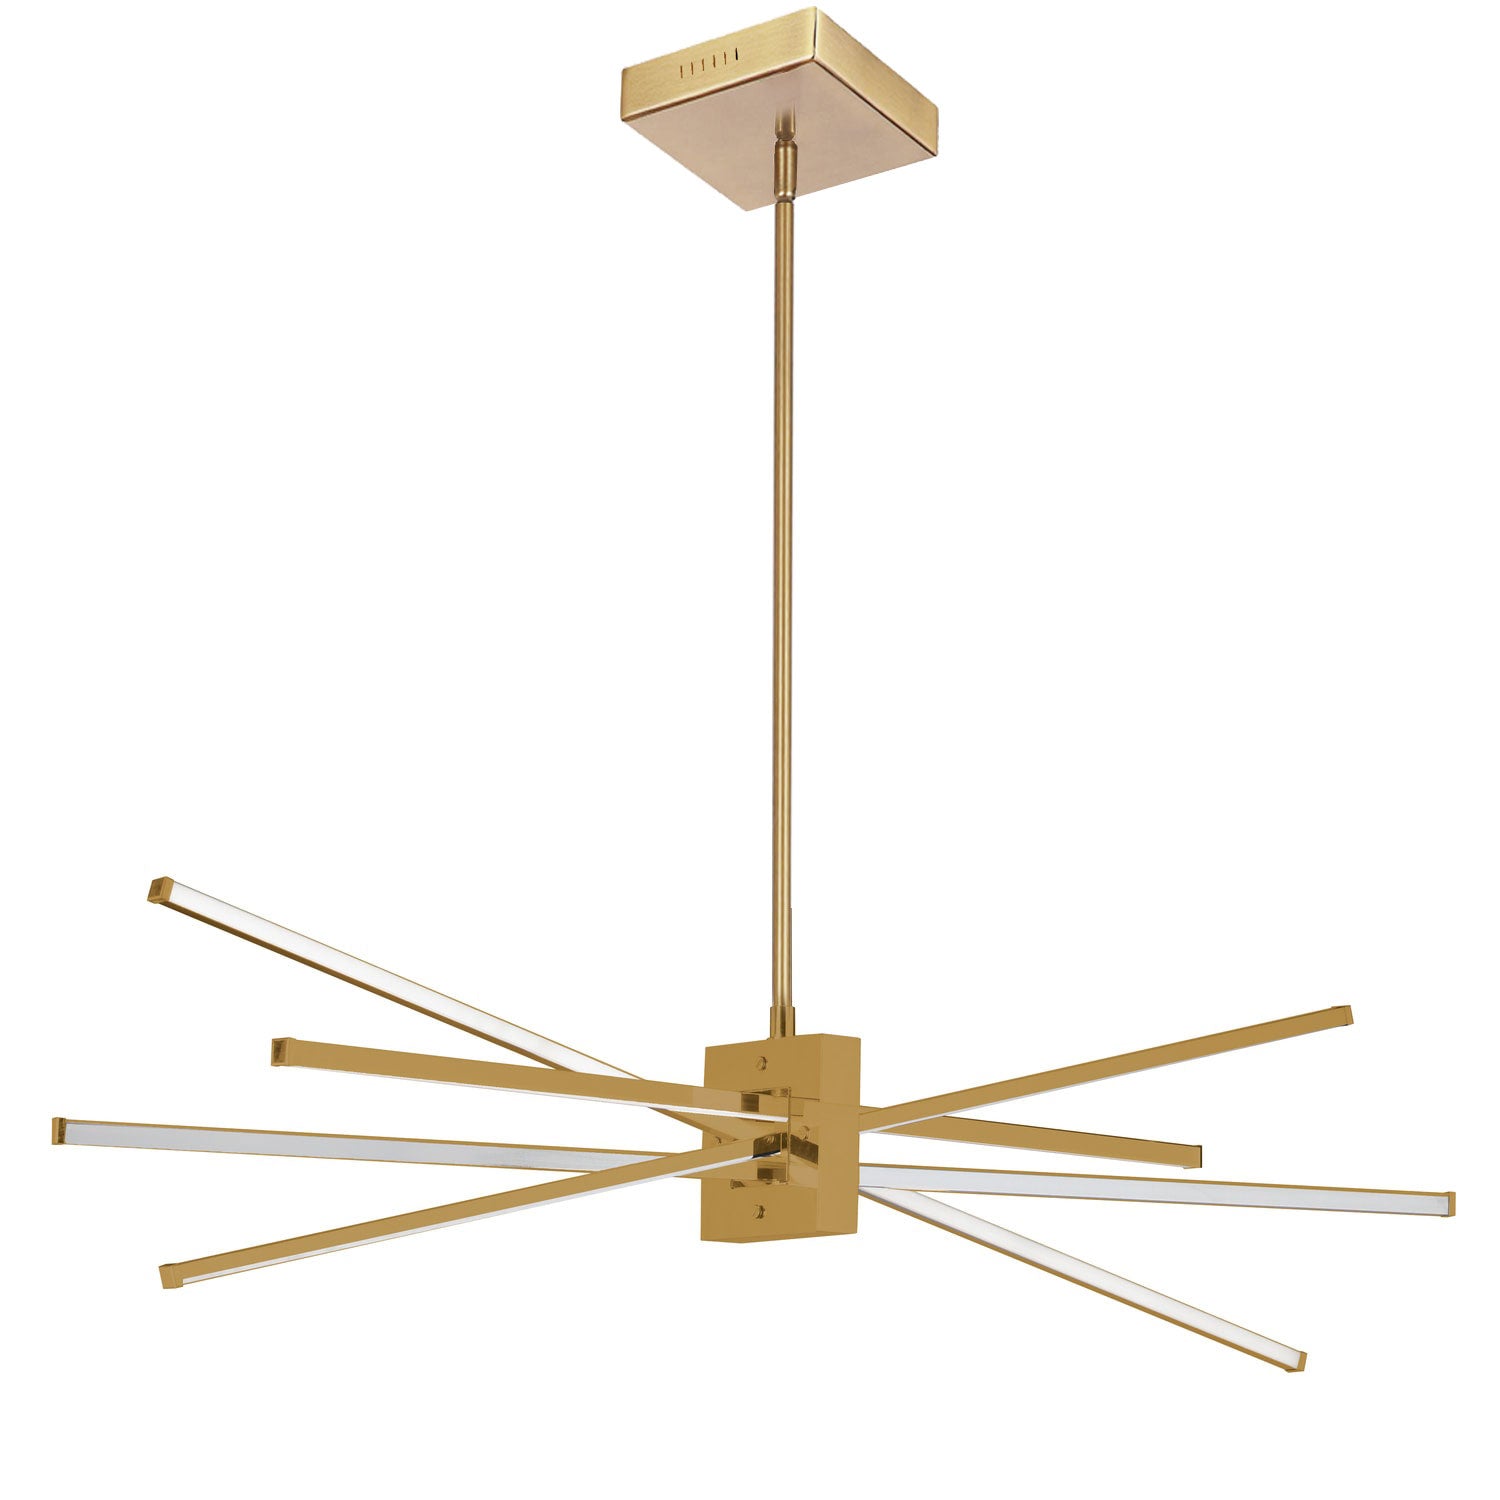 SUMMIT Chandelier Gold INTEGRATED LED - SUM-35HP-AGB | DAINOLITE